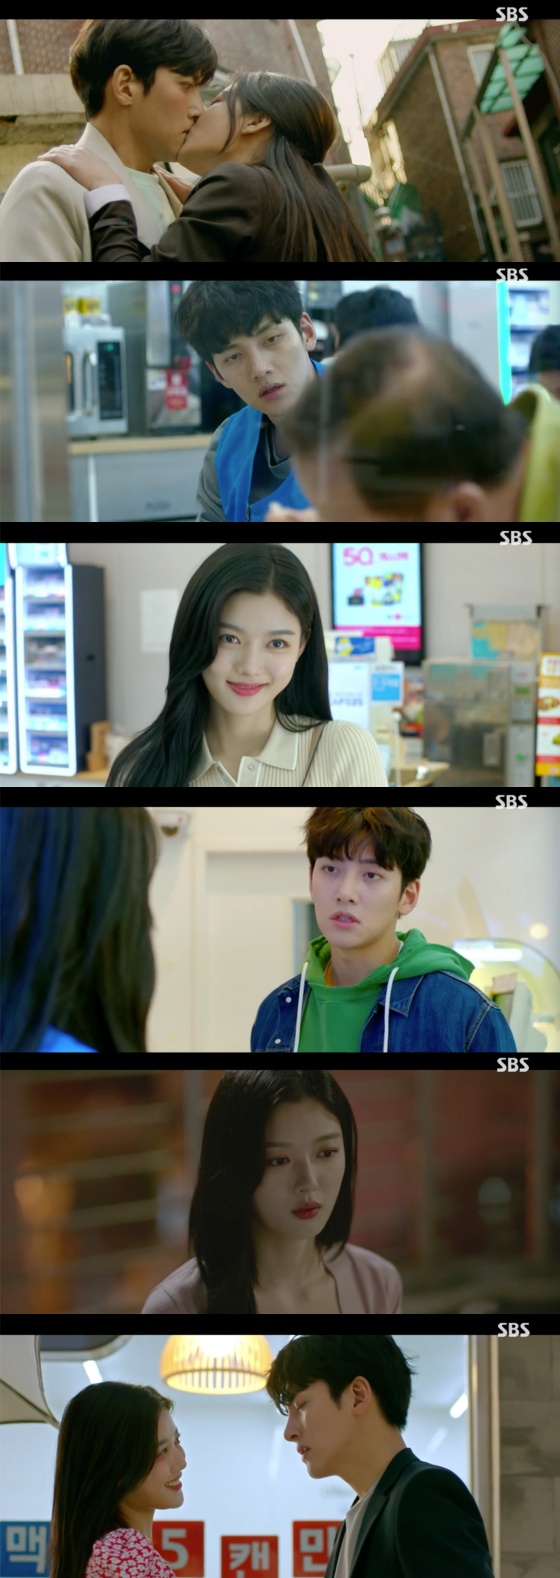 Choi Dae-heon (Ji Chang-wook) played Kim Yoo-jung as Albas birth in the SBS gilt drama Convenience store morning star which was first broadcast on the afternoon of the 19th.Choi Dae-heon and Jeong Sae-byeol met for the first time intensely.The star said to Choi Dae-heon, Can not you buy me three mensols at the Convenience store?Back, it was candy that Choi Dae-heon came out of: Be grown up and put your energy into productive work, said Choi Dae-heon, who said.The star approached Choi Dae-heon and kissed her, saying, This is the price I was worried about. Its the first time Ive asked you to stop tobacco. Numbers?Choi Dae-heon stopped when she called the number, and the star stored Choi Dae-heons number and said, Be careful, brother, I dont know what to do with my brother.Three years later, Choi Dae-heon and Jung Sae-byeol met again as Convenience store store owner and Alba student.The star went to Alba at Choi Dae-heons Convenience store.Choi Dae-heon recognized and refused that the star was a student who asked him to buy a tobacco.Choi Dae-heon, however, was forced to Gu Long the star, and Choi Dae-heon, who was tired and distracted, drank herb tea from the star and fell asleep.In the meantime, the star worked instead of Choi Dae-heon.Choi Dae-heon said to Jeong Sae-byeol, I will let you know when I have an interview tomorrow. However, Jeong Sae-byeol showed confidence that I am sorry for the child coming tomorrow.Soon there was a conflict between the two: Choi Dae-heon Misunderstood the star as a thief. Choi Dae-heon had prejudice against the star.Choi Dae-heon thought that the star was the culprit when the money disappeared from the force on the first day of Alba.Choi Dae-heon went to the house of the star, but it was not even the house of the star.The star went home hurt when he found out Choi Dae-heon was Missunderstood.In the end, Choi Dae-heon apologized to the star and the star accepted it.